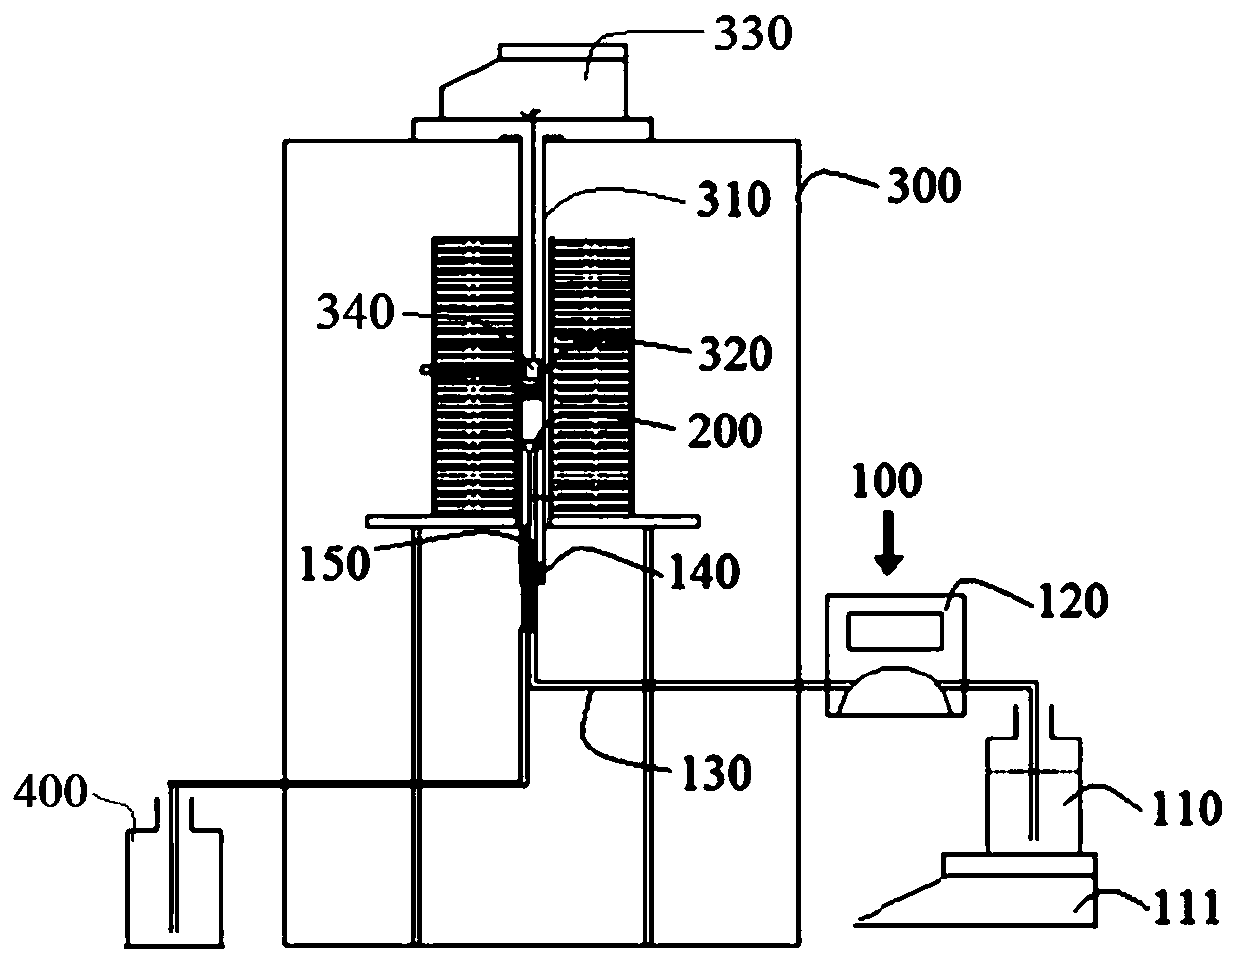 A method for generating water vapor in a coke reactivity measuring device